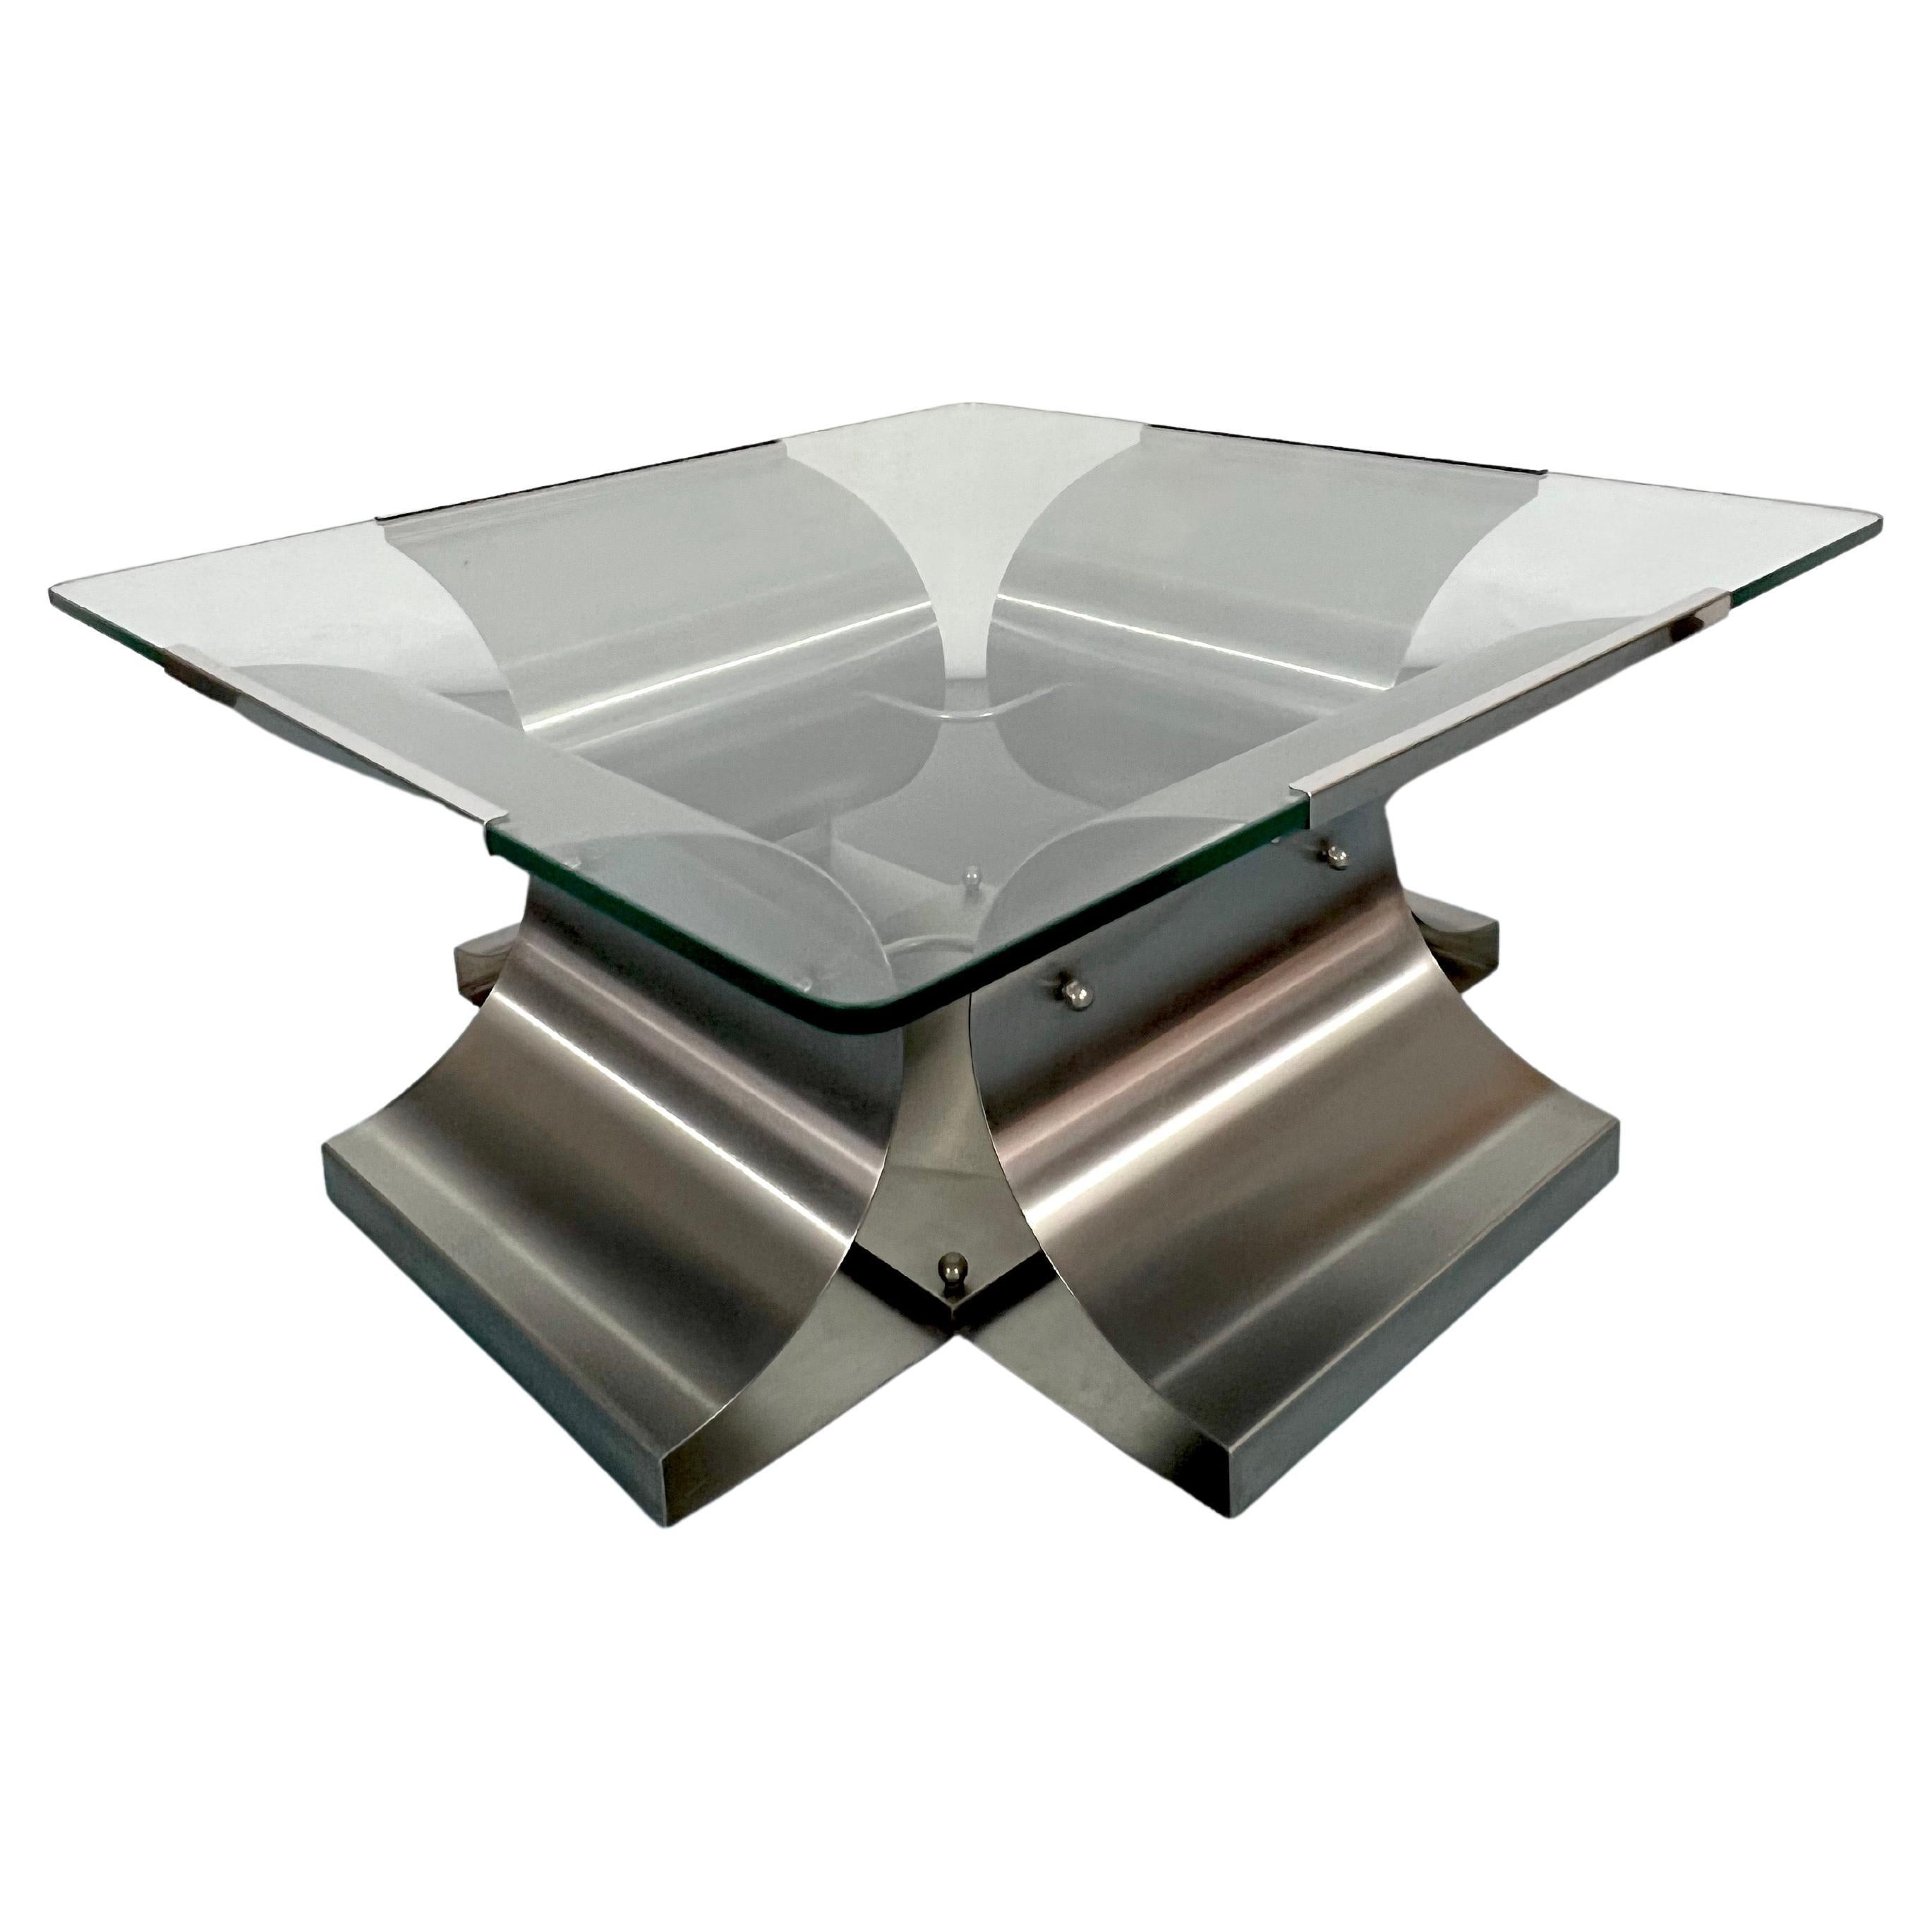 Coffee Table in Brushed Steel by Francois Monnet for Kappa, France, 1970s